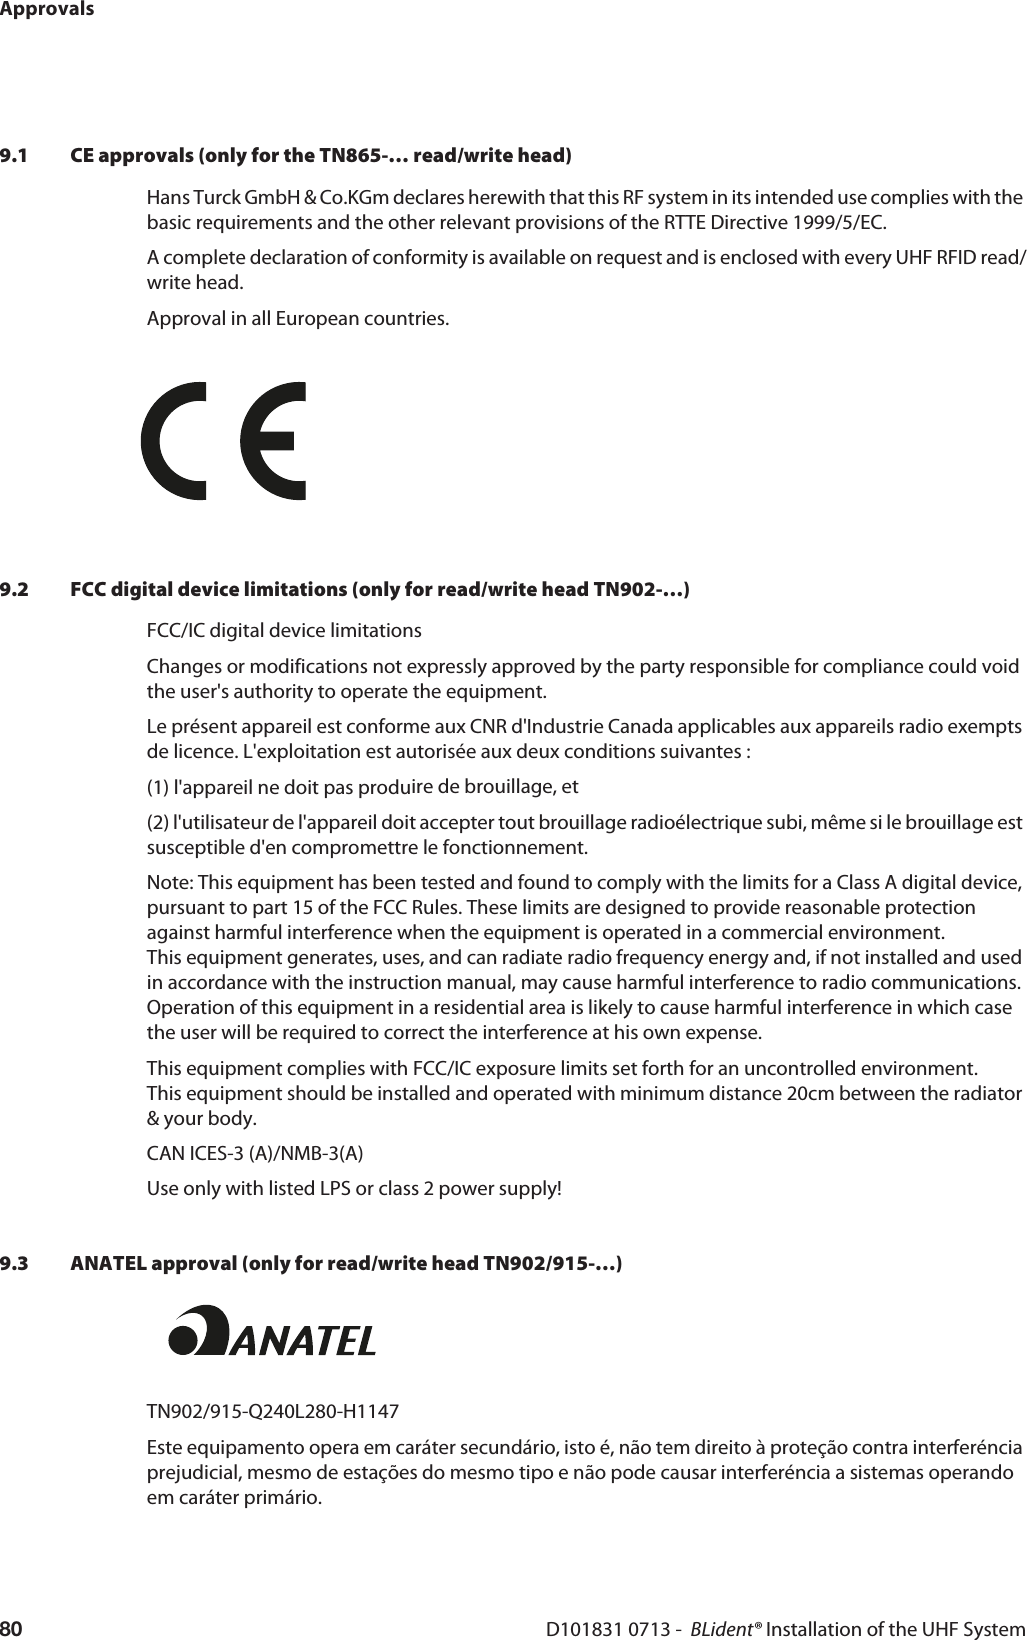 ApprovalsD101831 0713 -  BLident® Installation of the UHF System809.1 CE approvals (only for the TN865-… read/write head)Hans Turck GmbH &amp; Co.KGm declares herewith that this RF system in its intended use complies with the basic requirements and the other relevant provisions of the RTTE Directive 1999/5/EC.A complete declaration of conformity is available on request and is enclosed with every UHF RFID read/write head.Approval in all European countries.9.2 FCC digital device limitations (only for read/write head TN902-…)FCC/IC digital device limitationsChanges or modifications not expressly approved by the party responsible for compliance could void the user&apos;s authority to operate the equipment. Le présent appareil est conforme aux CNR d&apos;Industrie Canada applicables aux appareils radio exempts de licence. L&apos;exploitation est autorisée aux deux conditions suivantes : (1) l&apos;appareil ne doit pas produire de brouillage, et (2) l&apos;utilisateur de l&apos;appareil doit accepter tout brouillage radioélectrique subi, même si le brouillage est susceptible d&apos;en compromettre le fonctionnement. Note: This equipment has been tested and found to comply with the limits for a Class A digital device, pursuant to part 15 of the FCC Rules. These limits are designed to provide reasonable protection against harmful interference when the equipment is operated in a commercial environment.  This equipment generates, uses, and can radiate radio frequency energy and, if not installed and used in accordance with the instruction manual, may cause harmful interference to radio communications. Operation of this equipment in a residential area is likely to cause harmful interference in which case the user will be required to correct the interference at his own expense. This equipment complies with FCC/IC exposure limits set forth for an uncontrolled environment.  This equipment should be installed and operated with minimum distance 20cm between the radiator &amp; your body. CAN ICES-3 (A)/NMB-3(A) Use only with listed LPS or class 2 power supply!9.3 ANATEL approval (only for read/write head TN902/915-…)TN902/915-Q240L280-H1147 Este equipamento opera em caráter secundário, isto é, não tem direito à proteção contra interferéncia prejudicial, mesmo de estações do mesmo tipo e não pode causar interferéncia a sistemas operando em caráter primário.